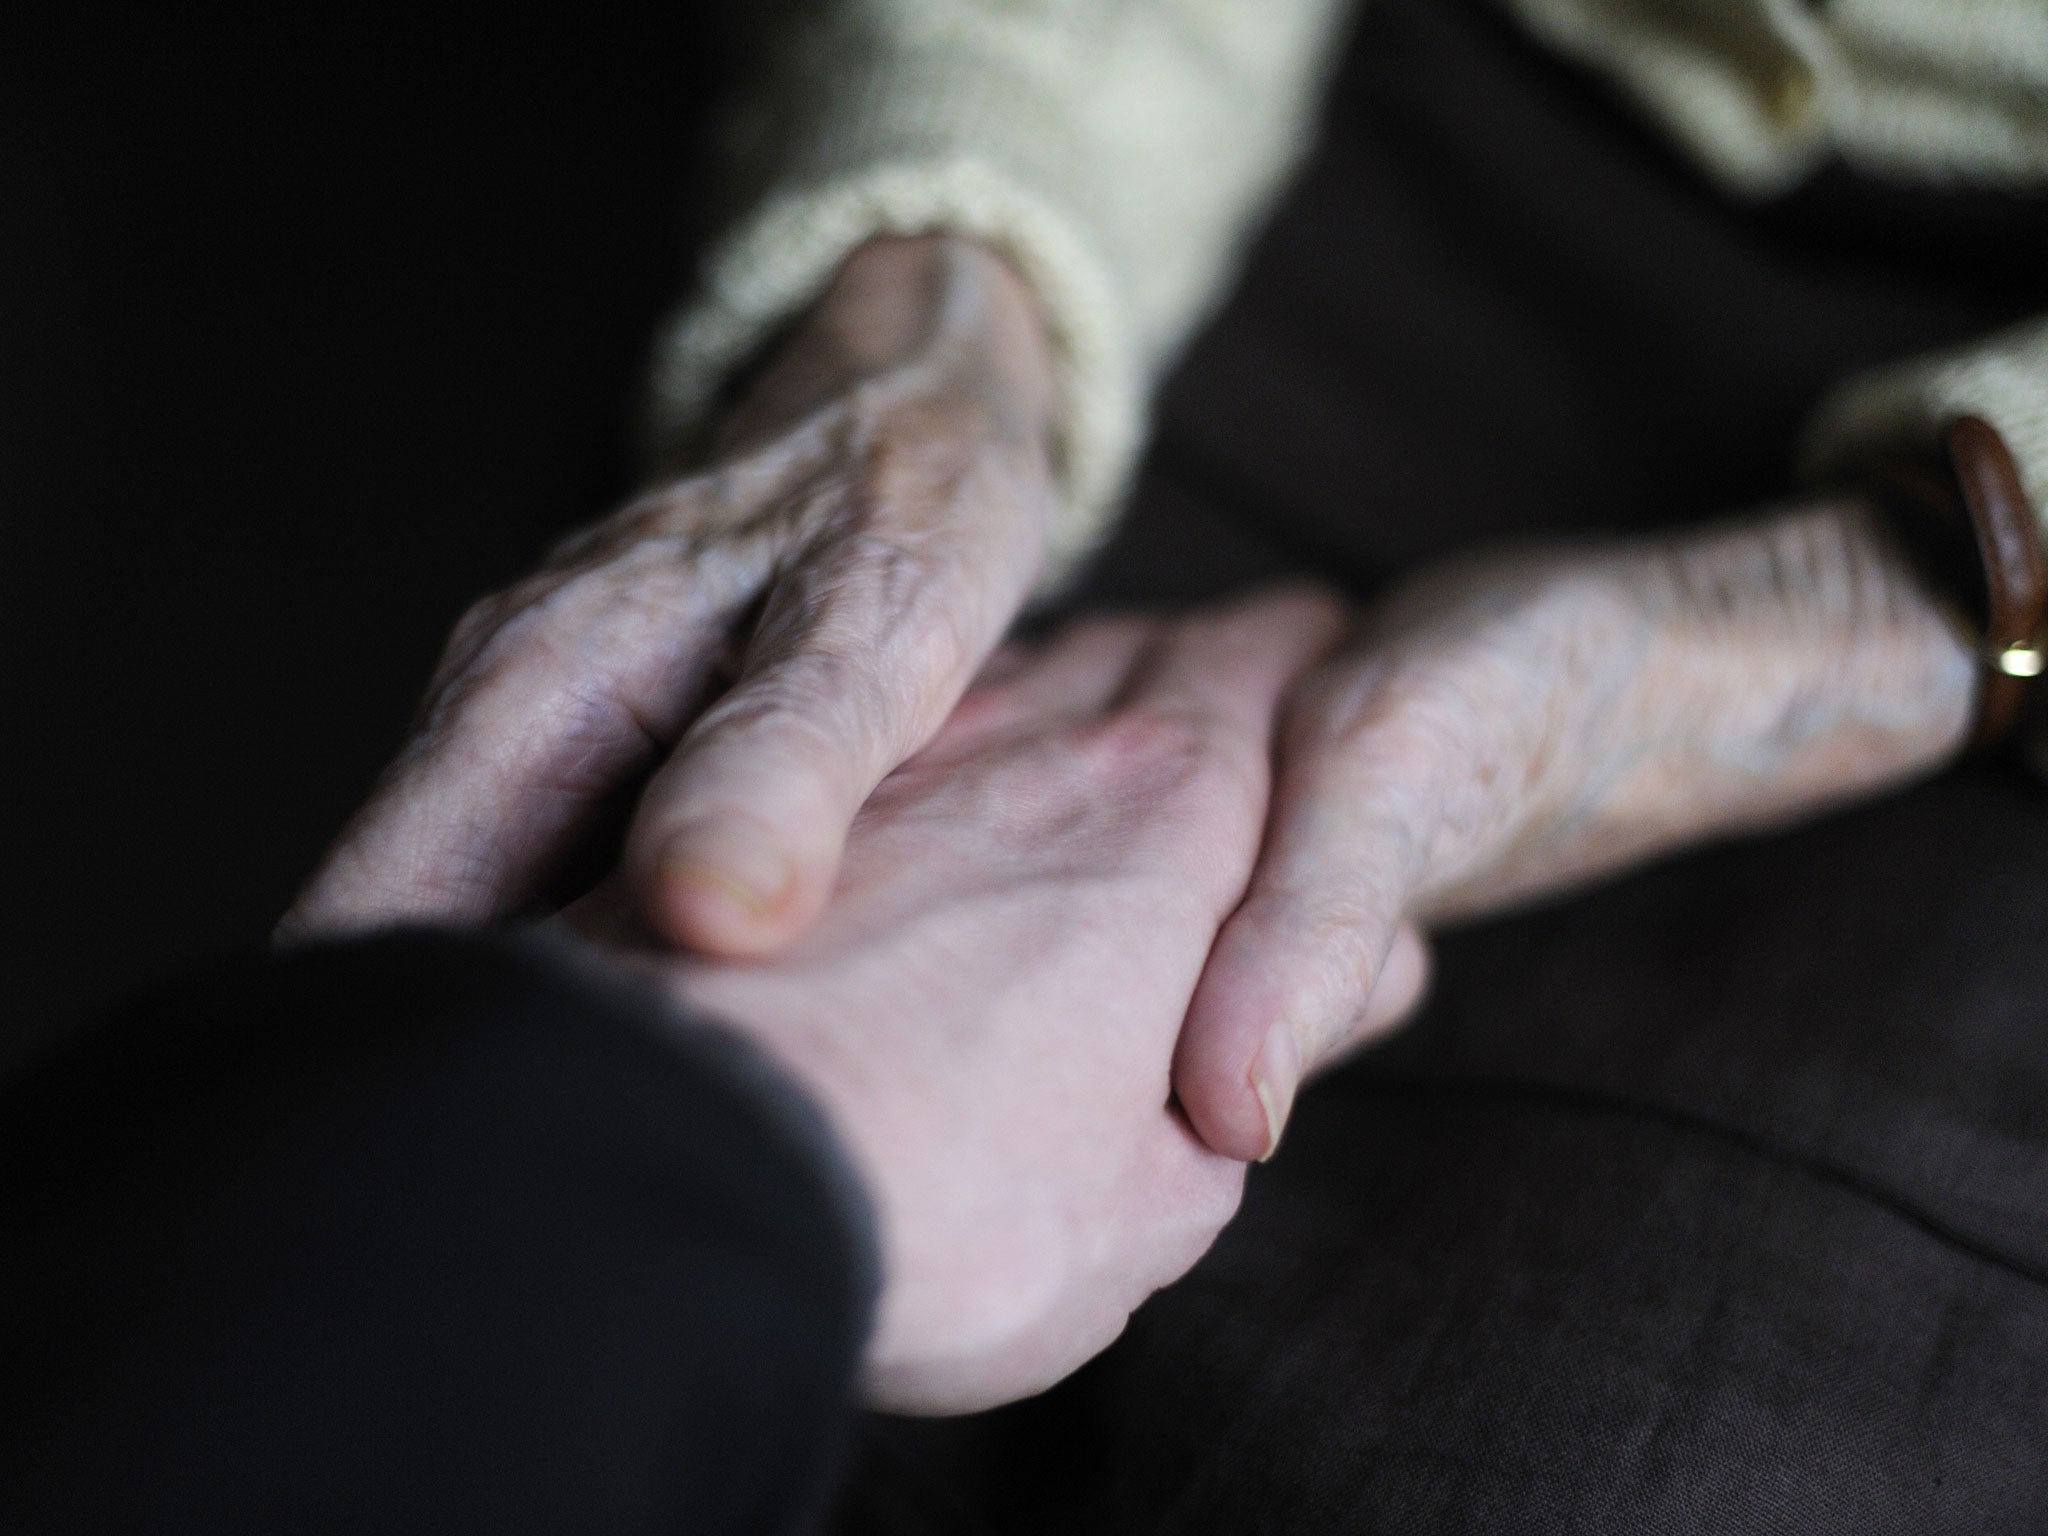 Alzheimer’s costs could soar to £34.8 billion a year by 2026